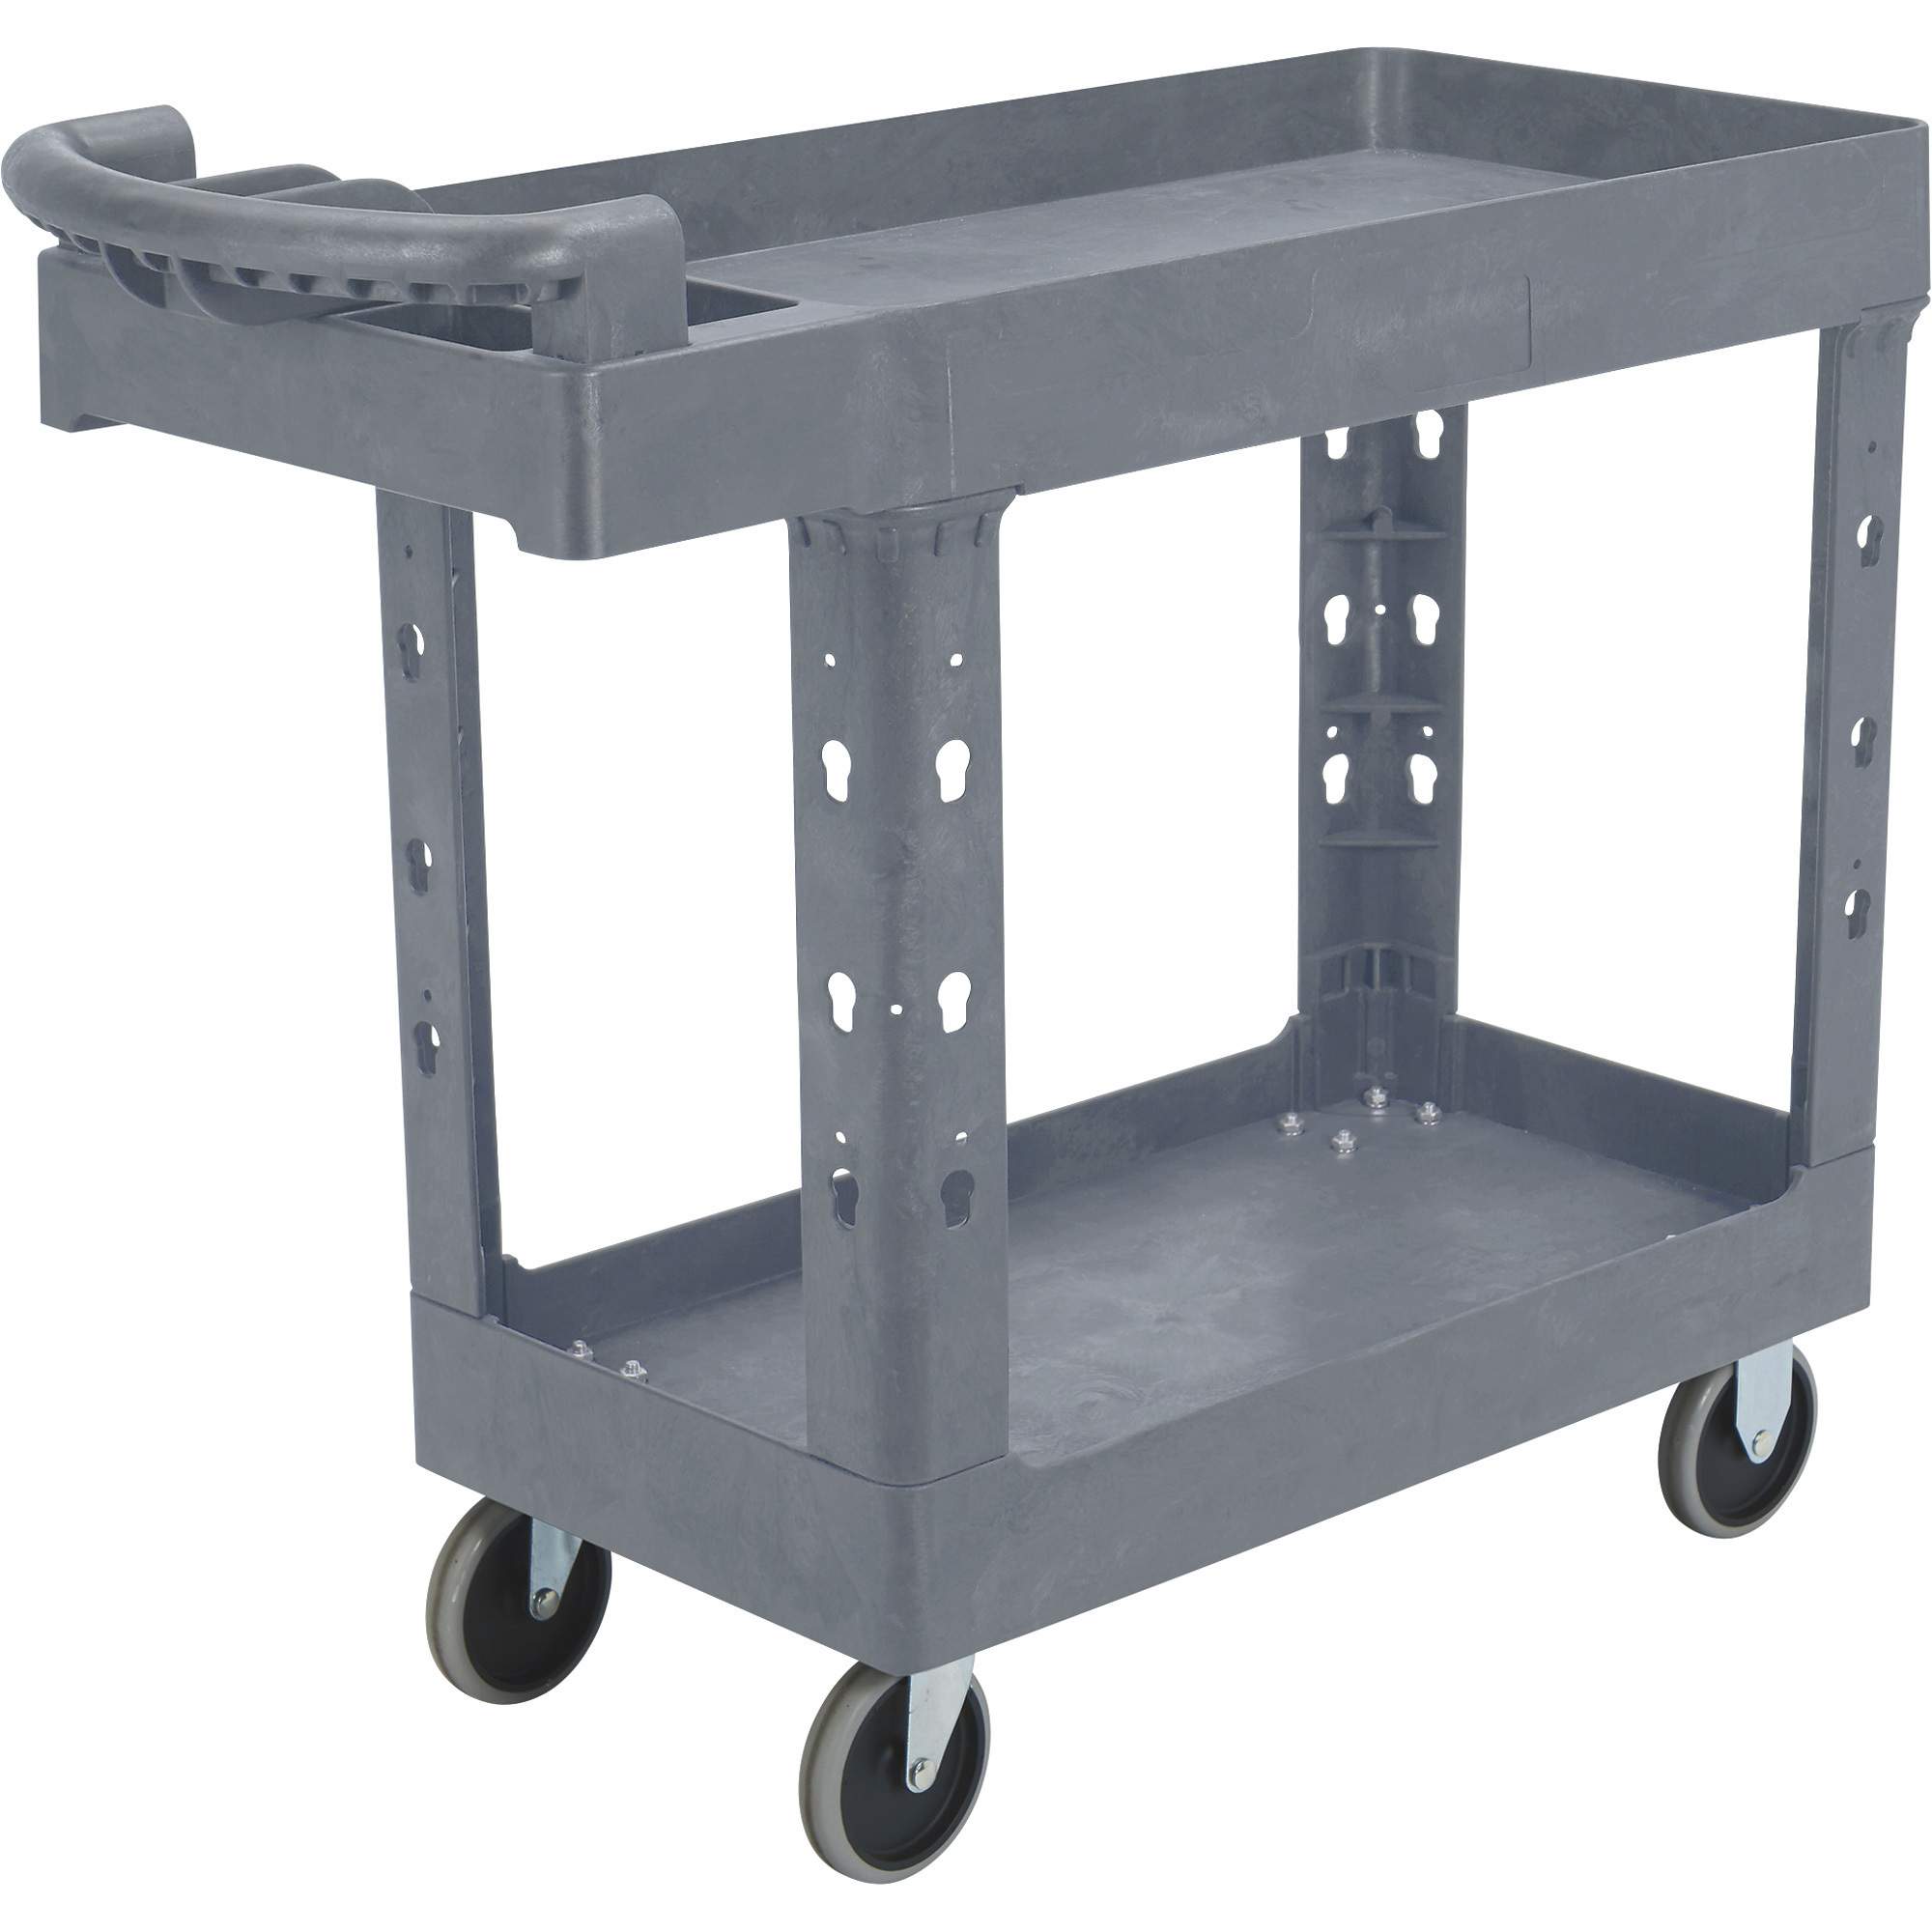 Strongway 500-Lb. Utility Cart with Ergonomic Handle â 40 3/8Inch D x 17 5/16Inch W x 34 5/8Inch H